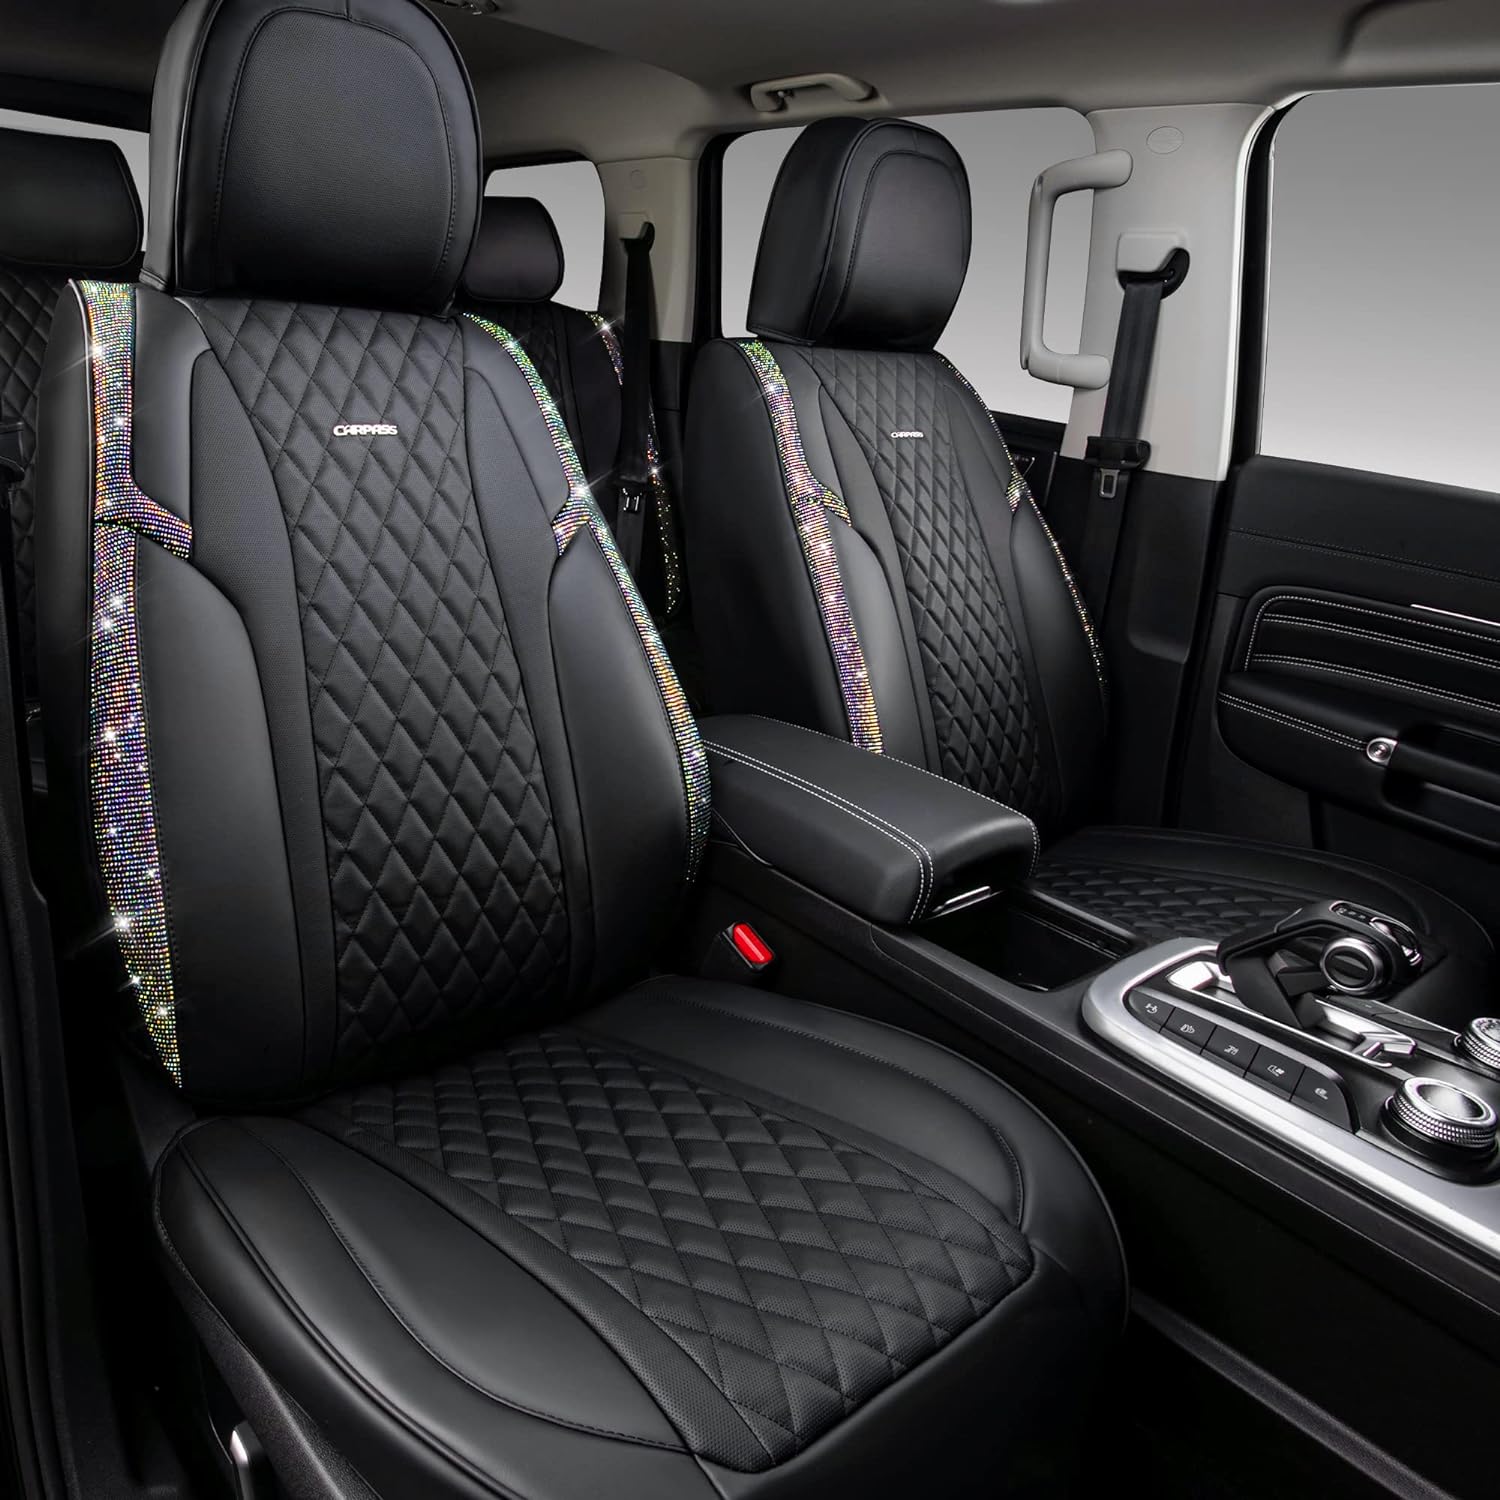 CAR PASS Iridescent Diamond Nappa Calfskin Leather Cushioned,Bling Seat Covers & Steering Cover & Car Floor Mats Universal Fit for Auto SUV Sedan,Sparkly Glitter Shining Rhinestone, Multicolor